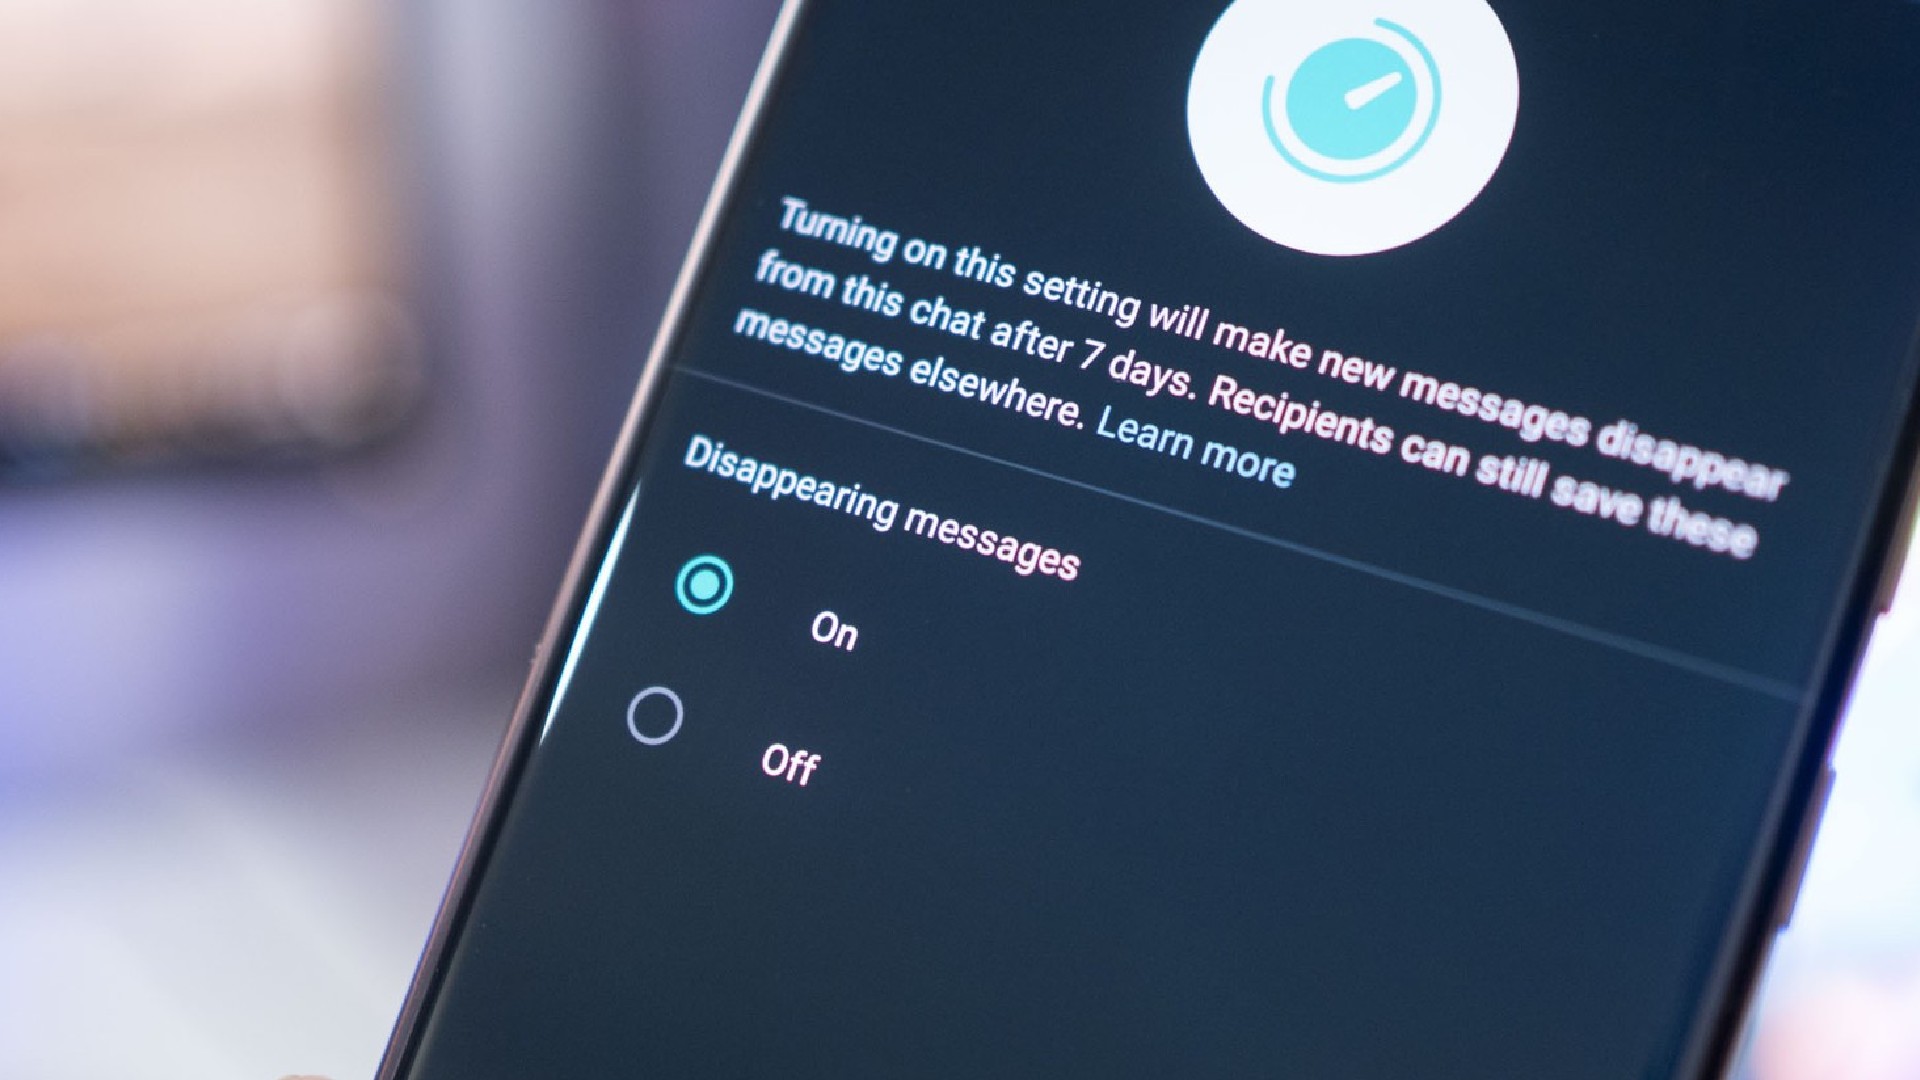 Now, WhatsApp Users Can View Messages Once They Have Been Sent.